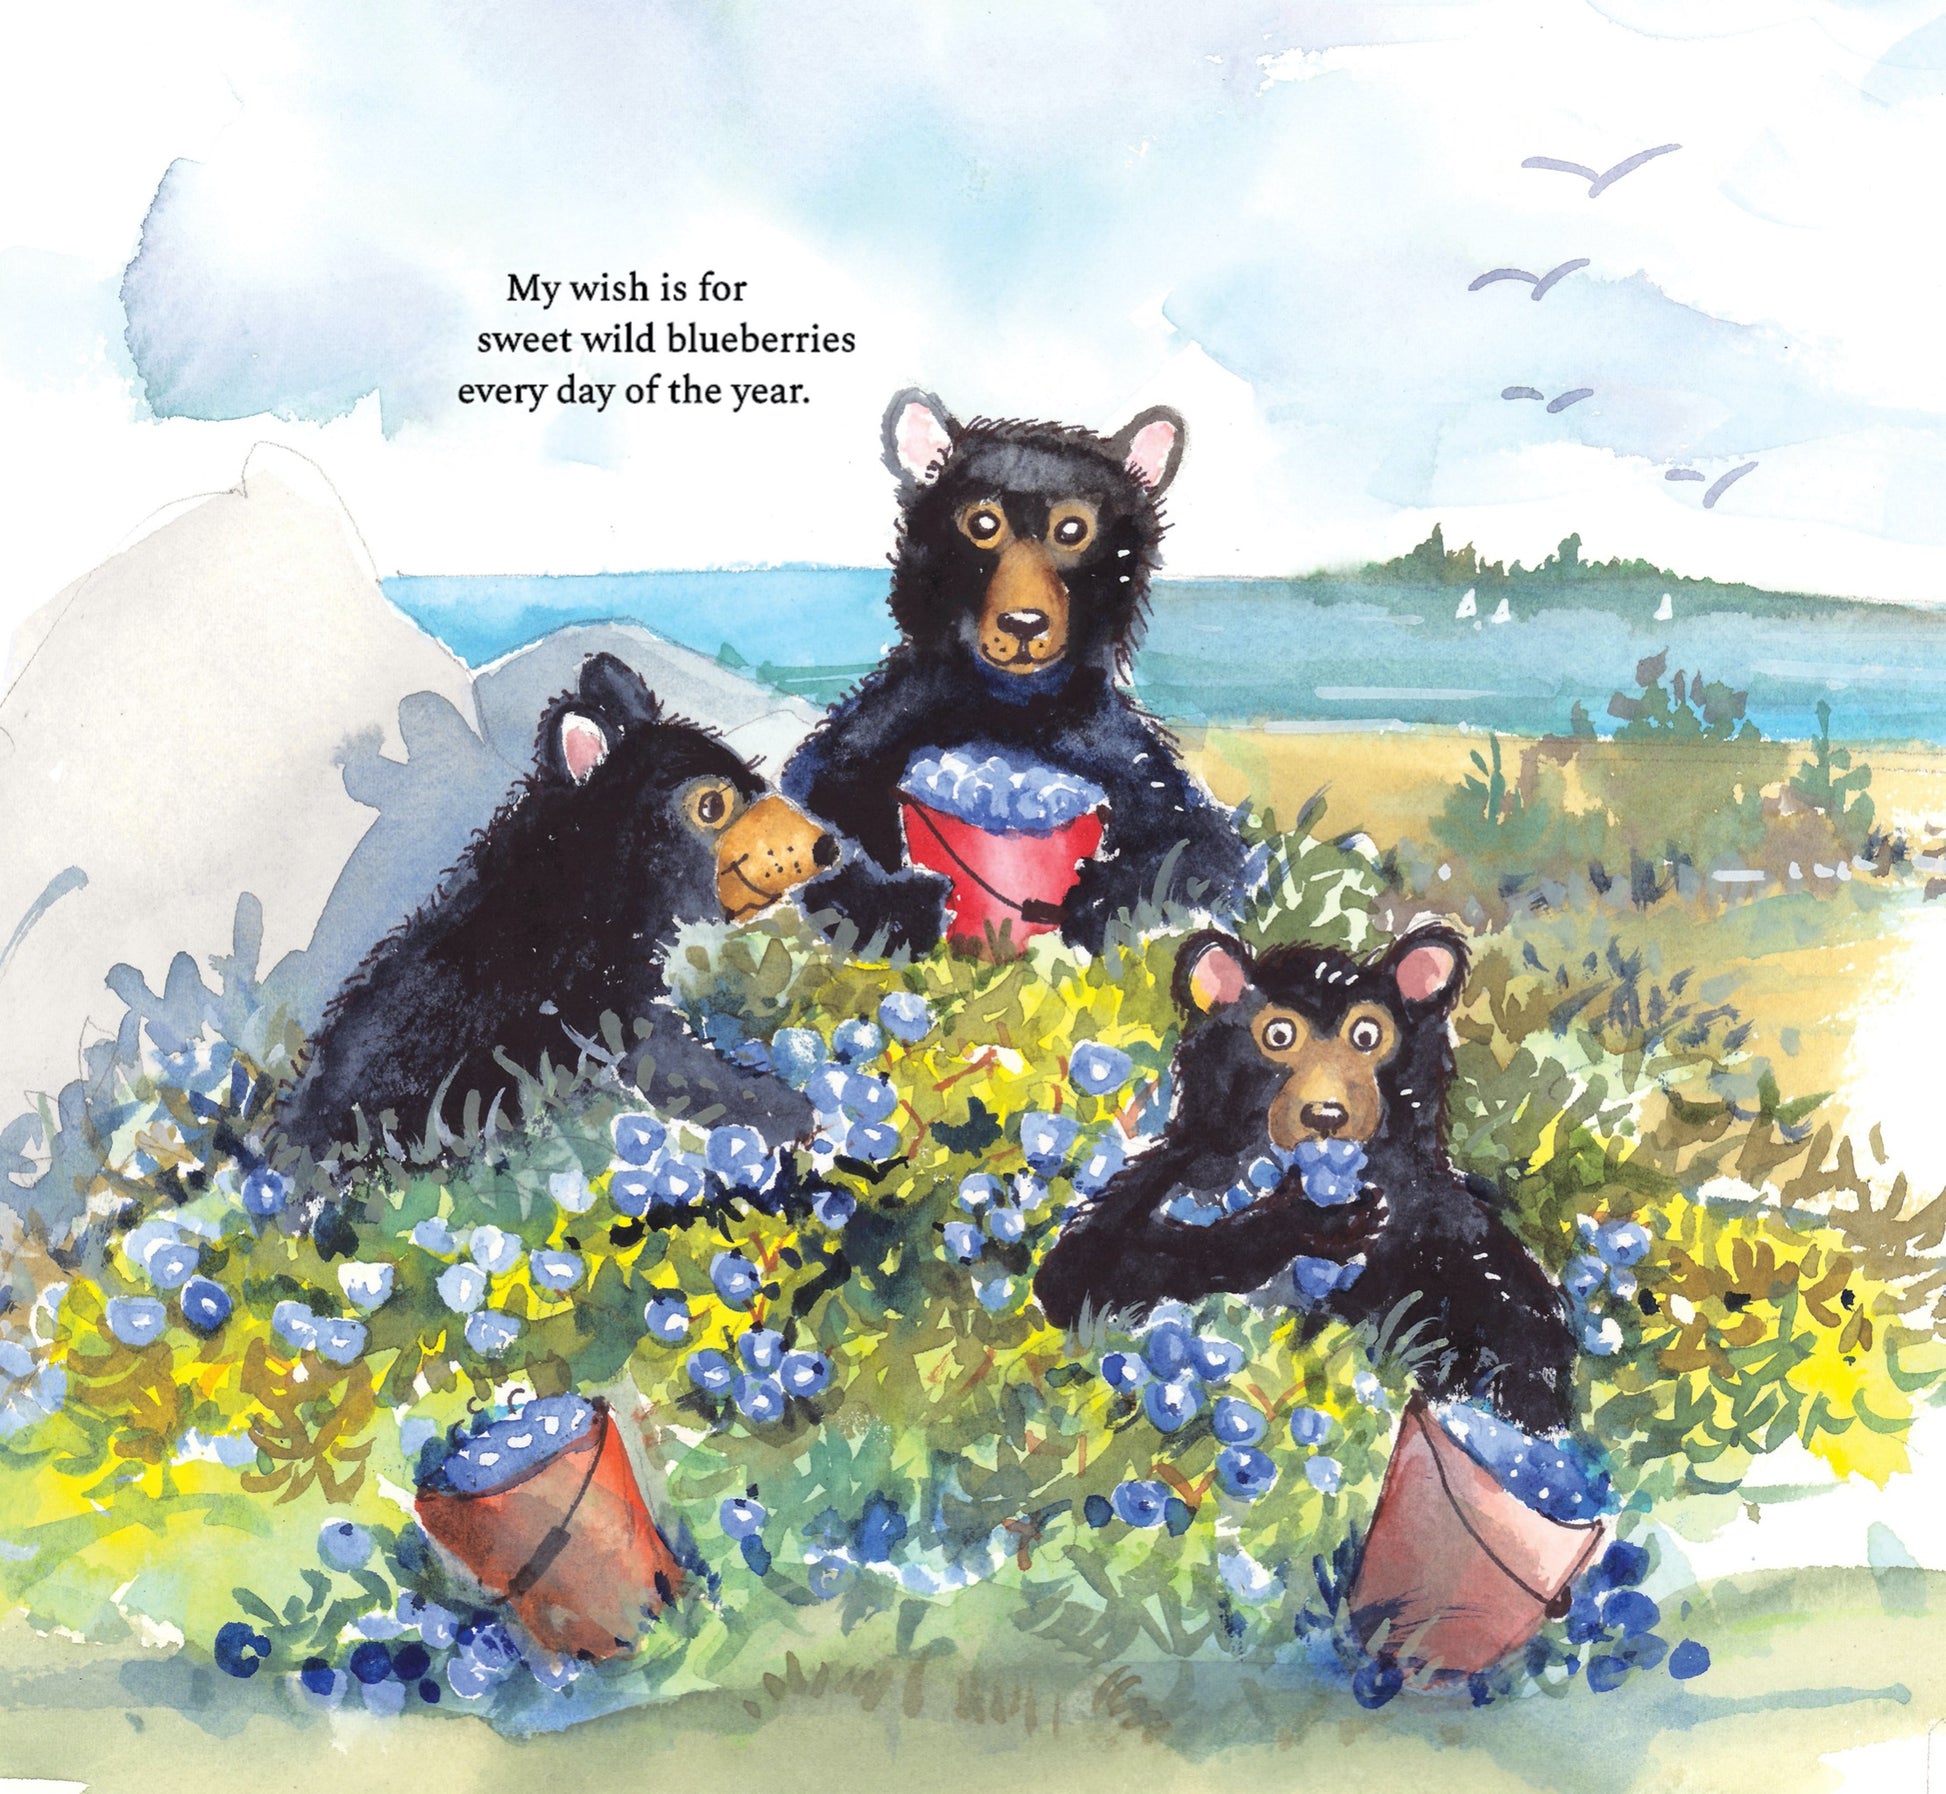 page from inside The Maine Birthday Book with bears in blueberries making a wish